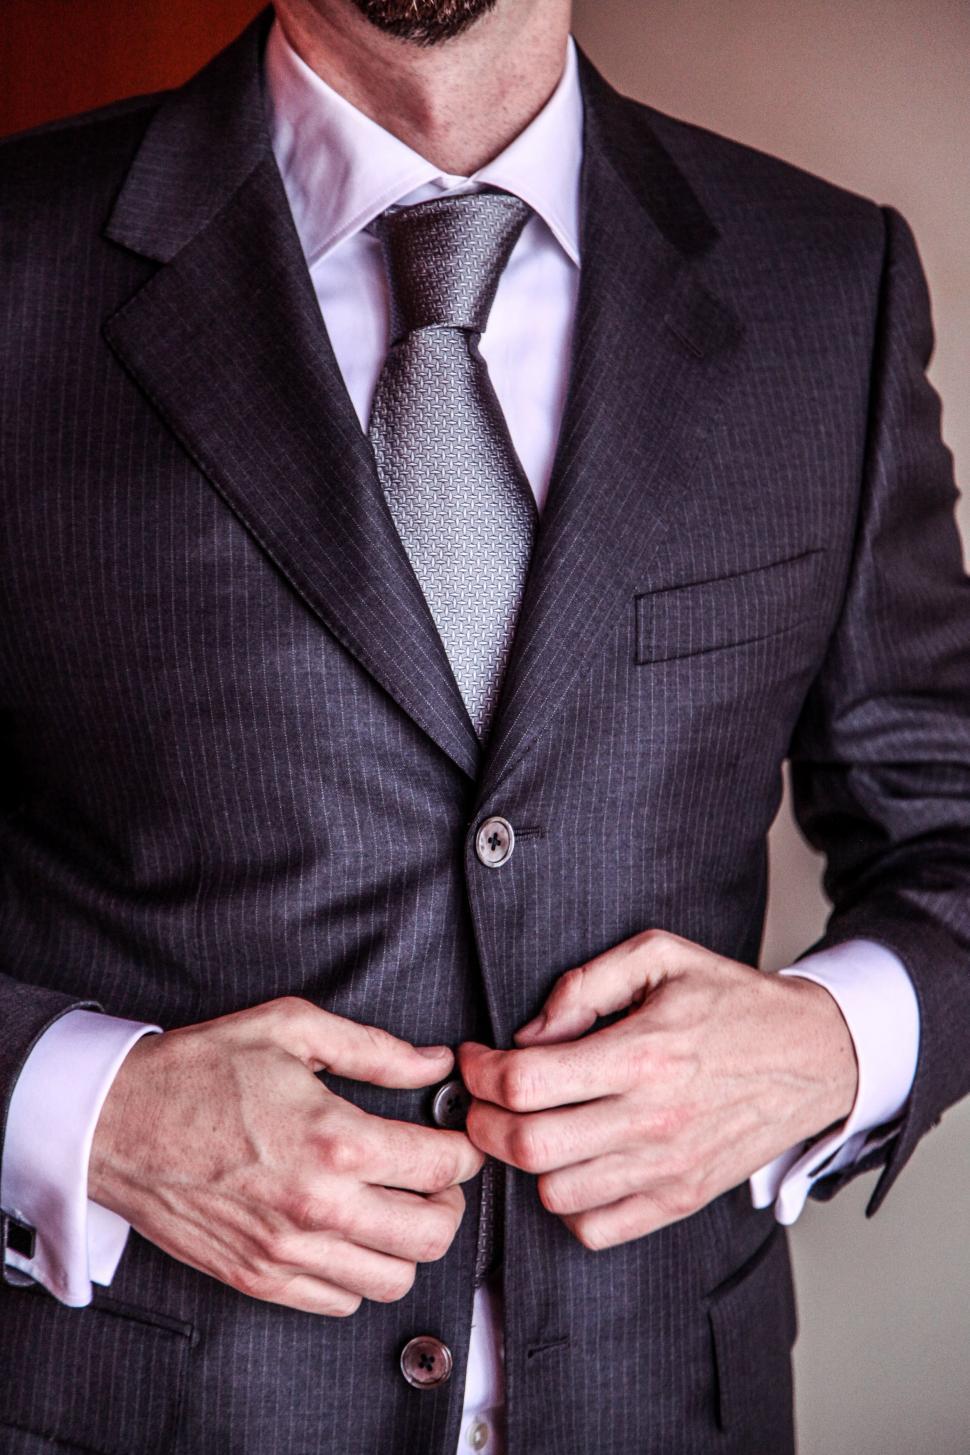 Free Image of Man in suit 